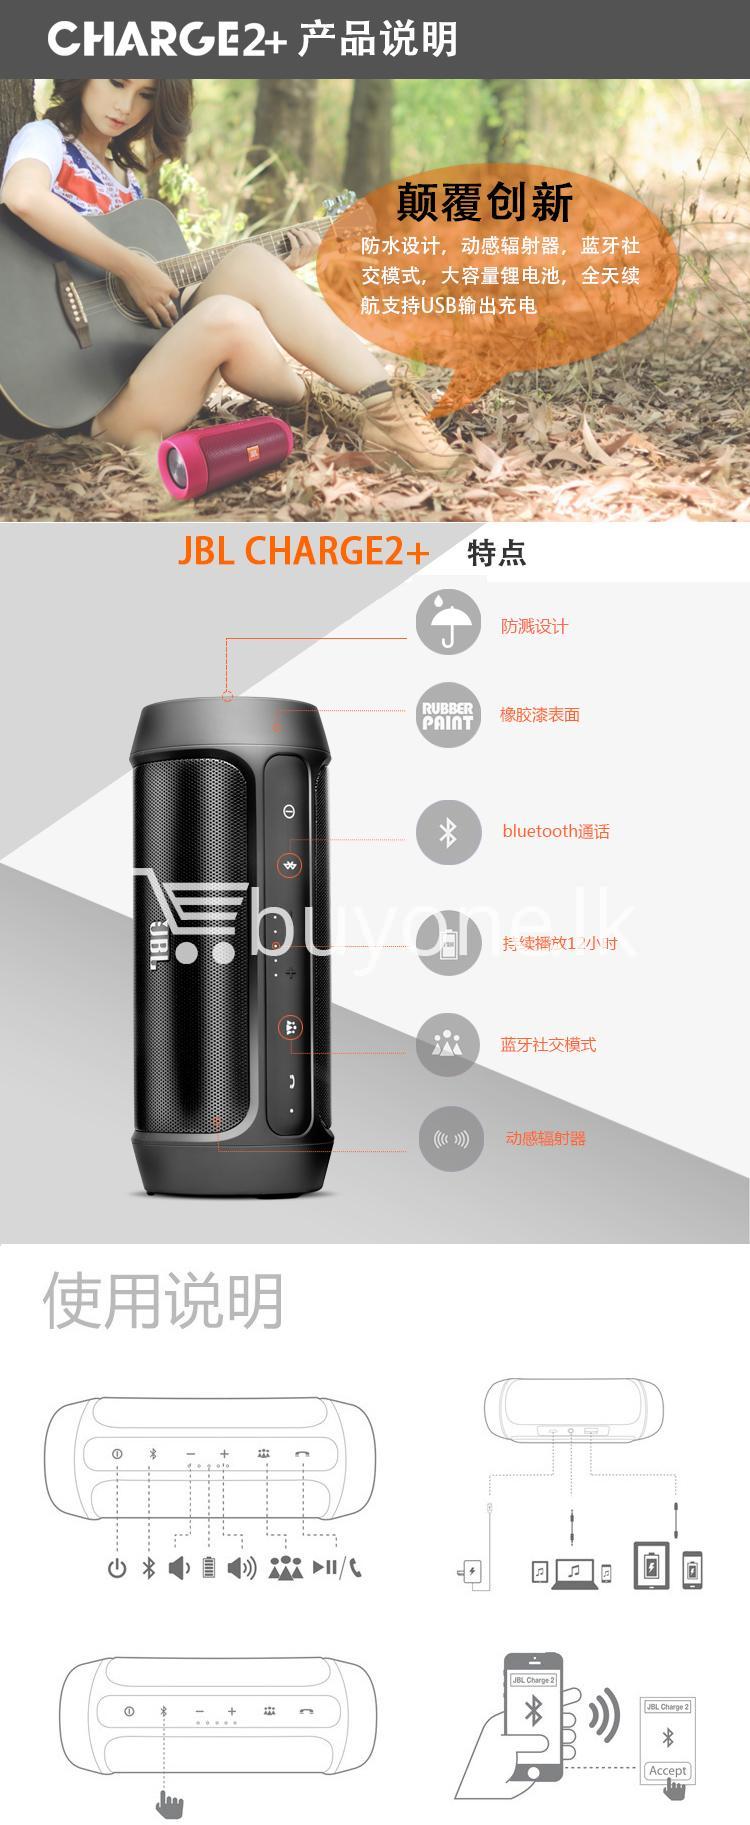 jbl charge 2 portable bluetooth speaker with usb charger power bank mobile phone accessories special best offer buy one lk sri lanka 08941 - JBL Charge 2 Portable Bluetooth Speaker with USB Charger Power Bank